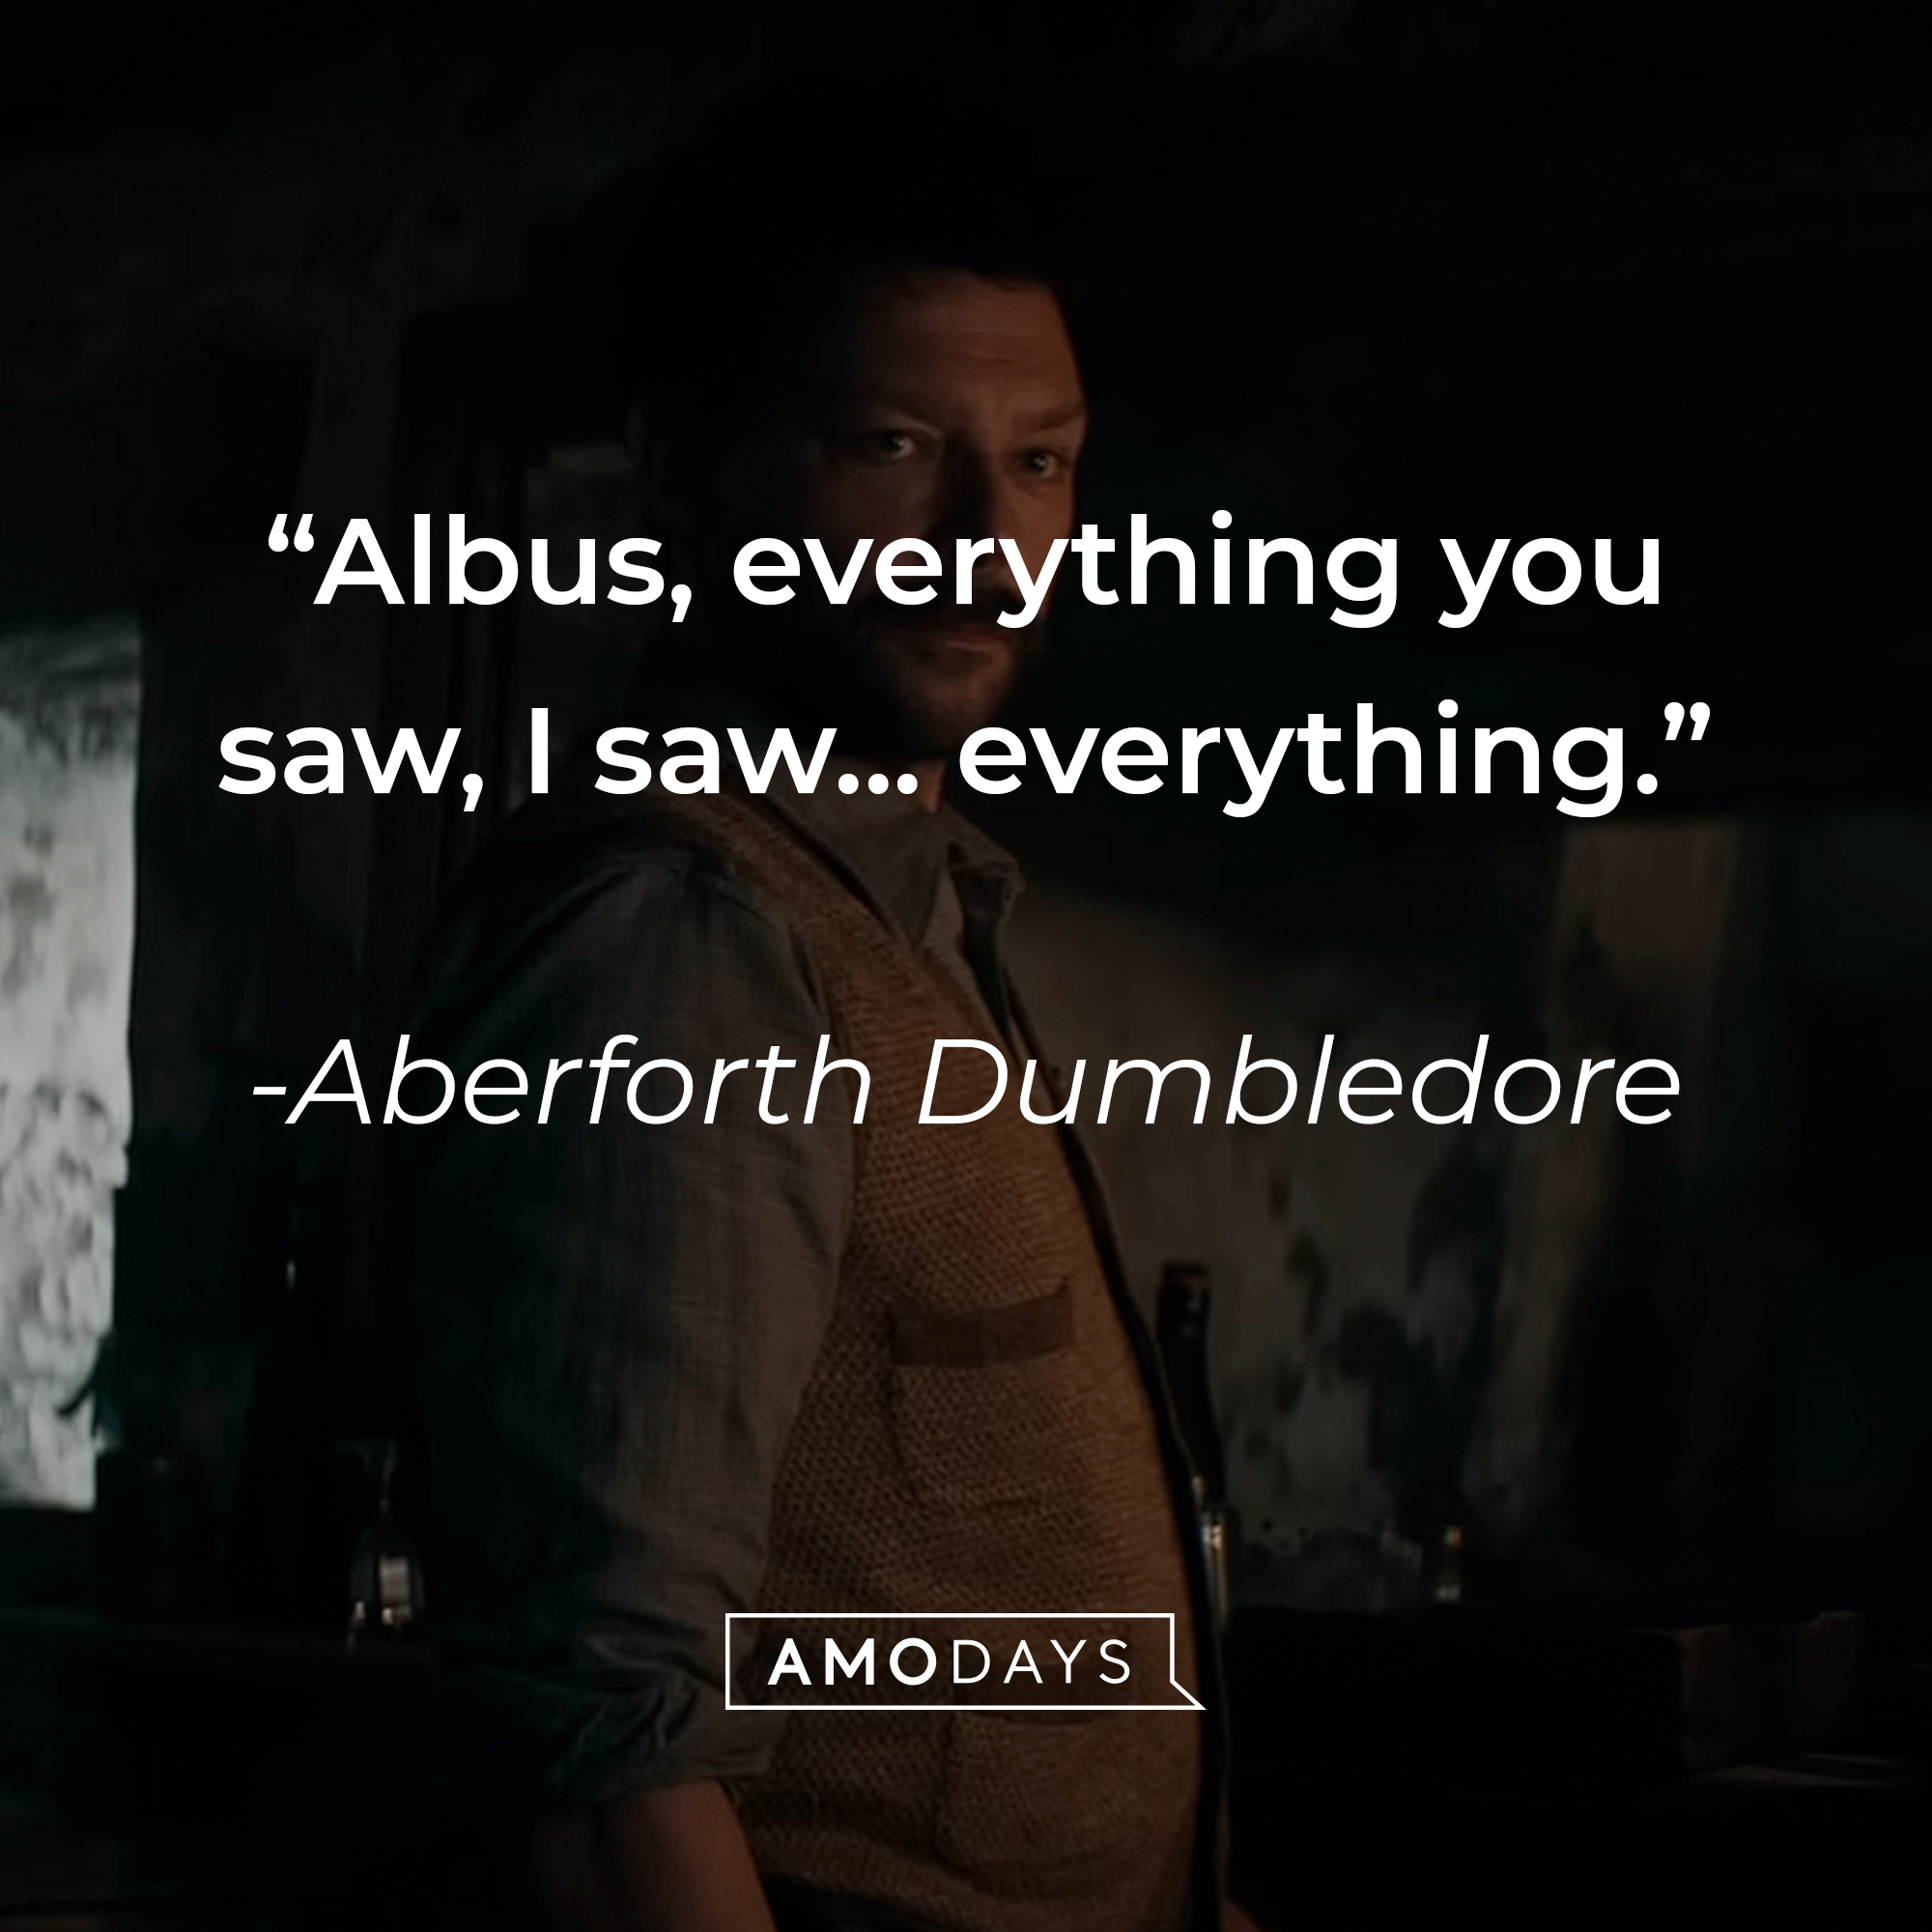 Aberforth Dumbledore, with his quote: "Albus, everything you saw, I saw... everything." | Source: Youtube.com/WarnerBrosPictures